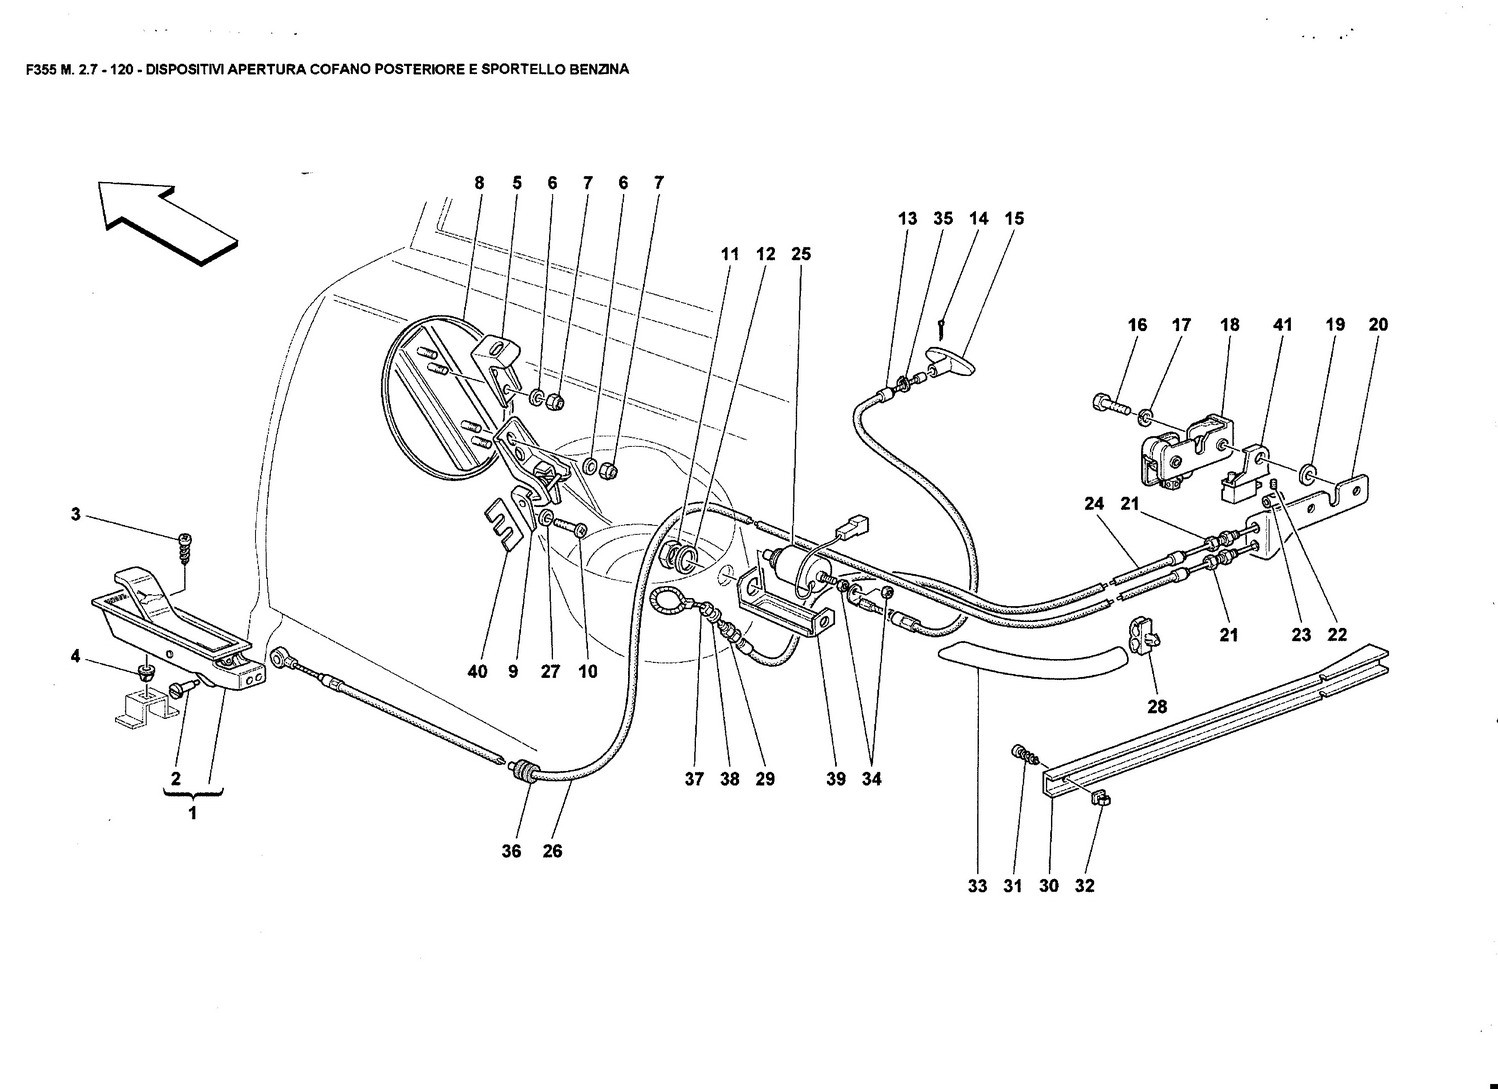 OPENING DEVICES FOR REAR HOOD AND GAS DOOR